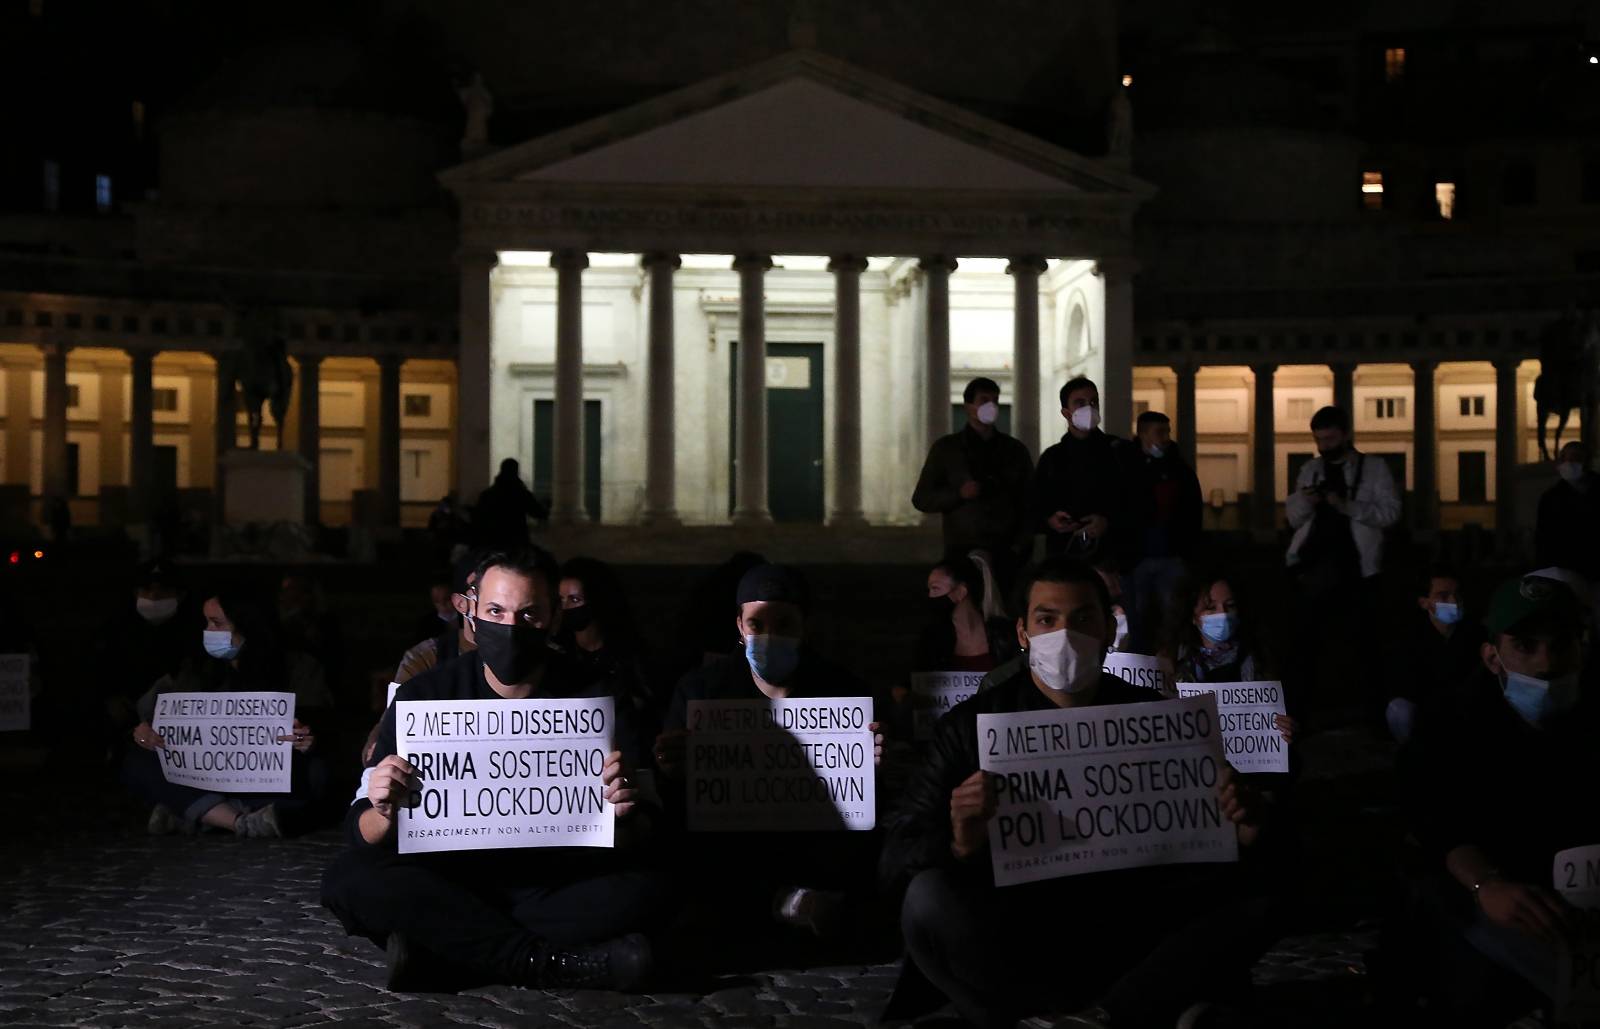 Hundreds of people gathered to protest against the measures implemented to stop the spread of the Covid-19 pandemic by the Government during the second wave of the Covid-19 Coronavirus pandemic in Naples.